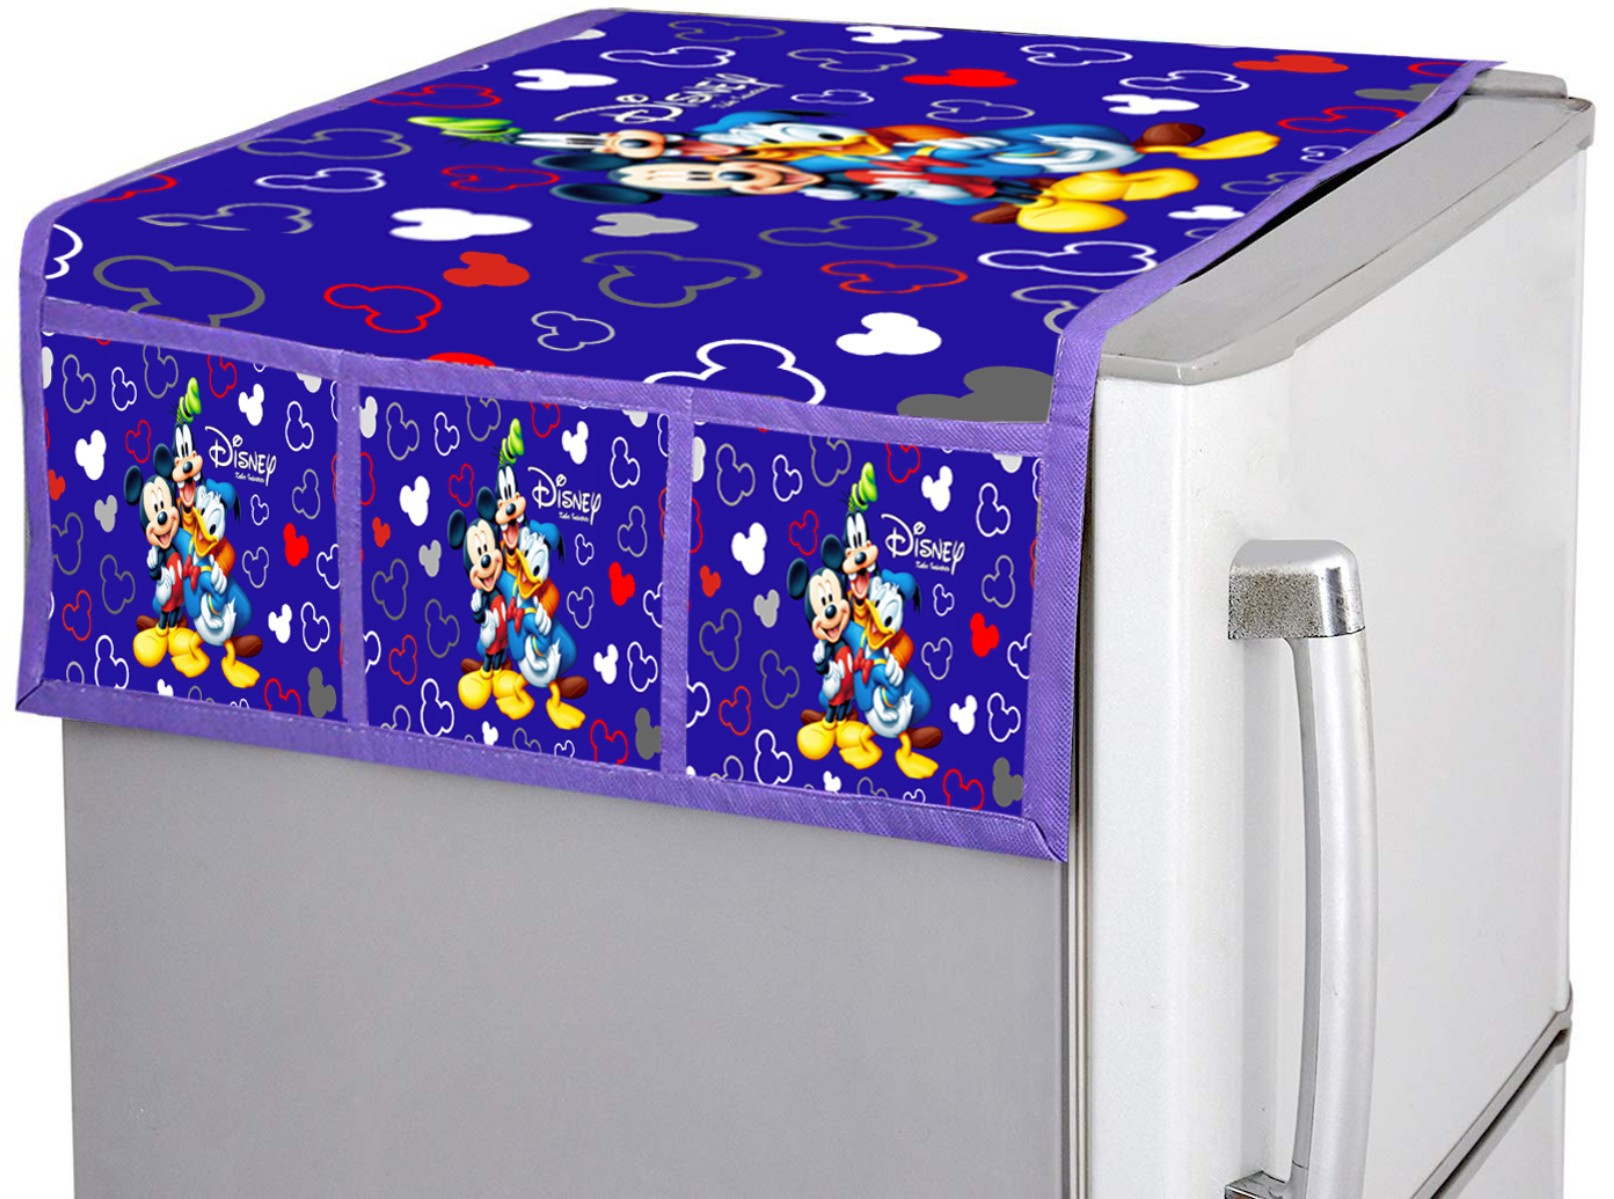 Kuber Industries Disney Team Mickey Print Silk Special long Crush 3-Layered Fridge/Refrigerator Top Cover with 6 Utility Pockets,Royal Blue